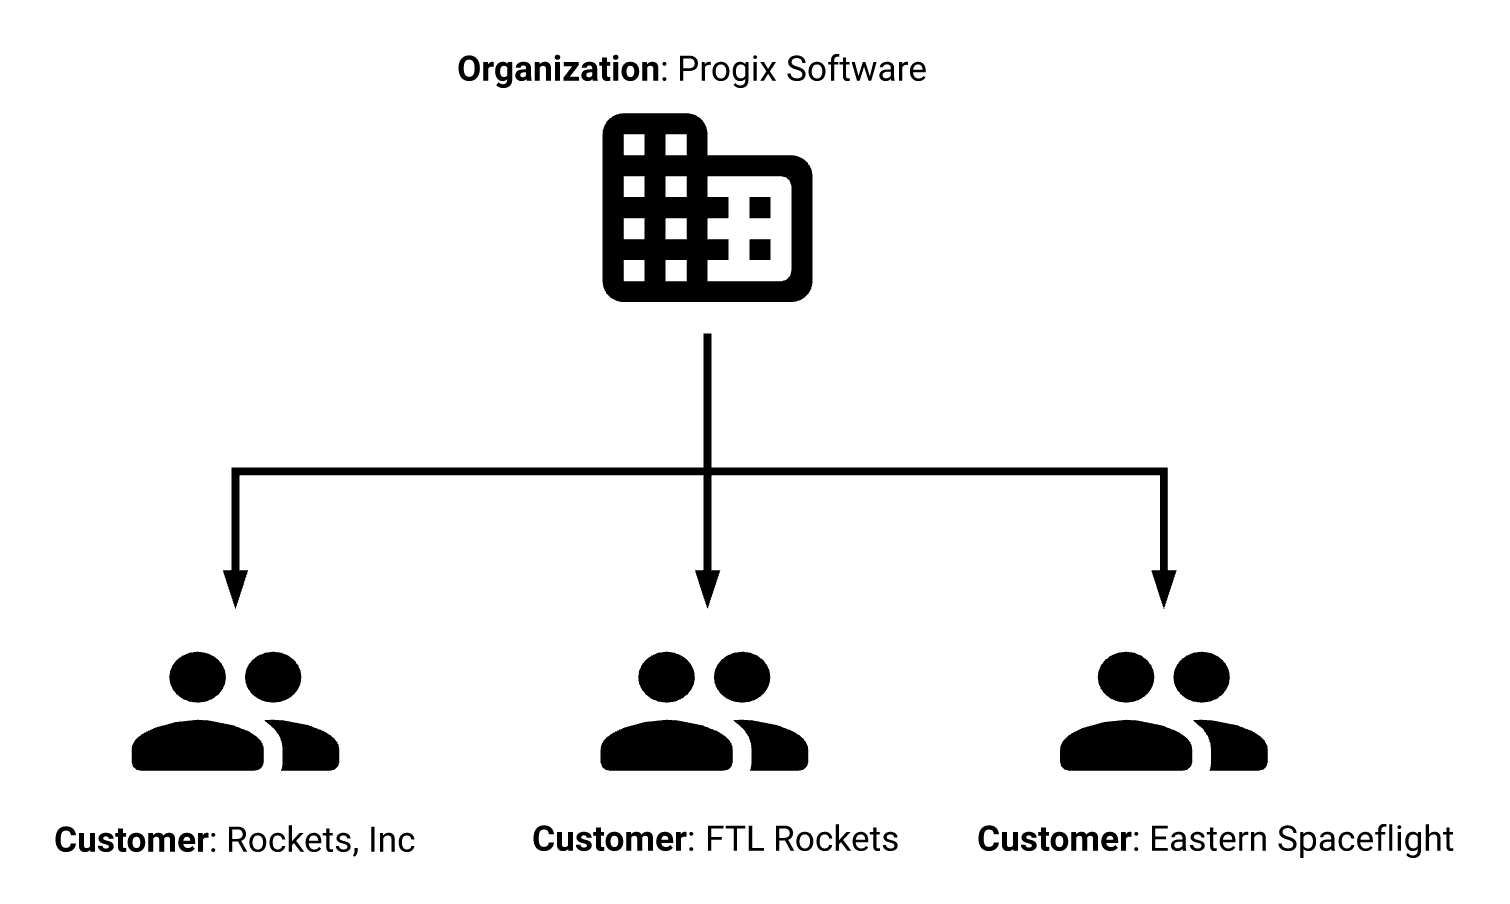 Simple diagram of an org and customers